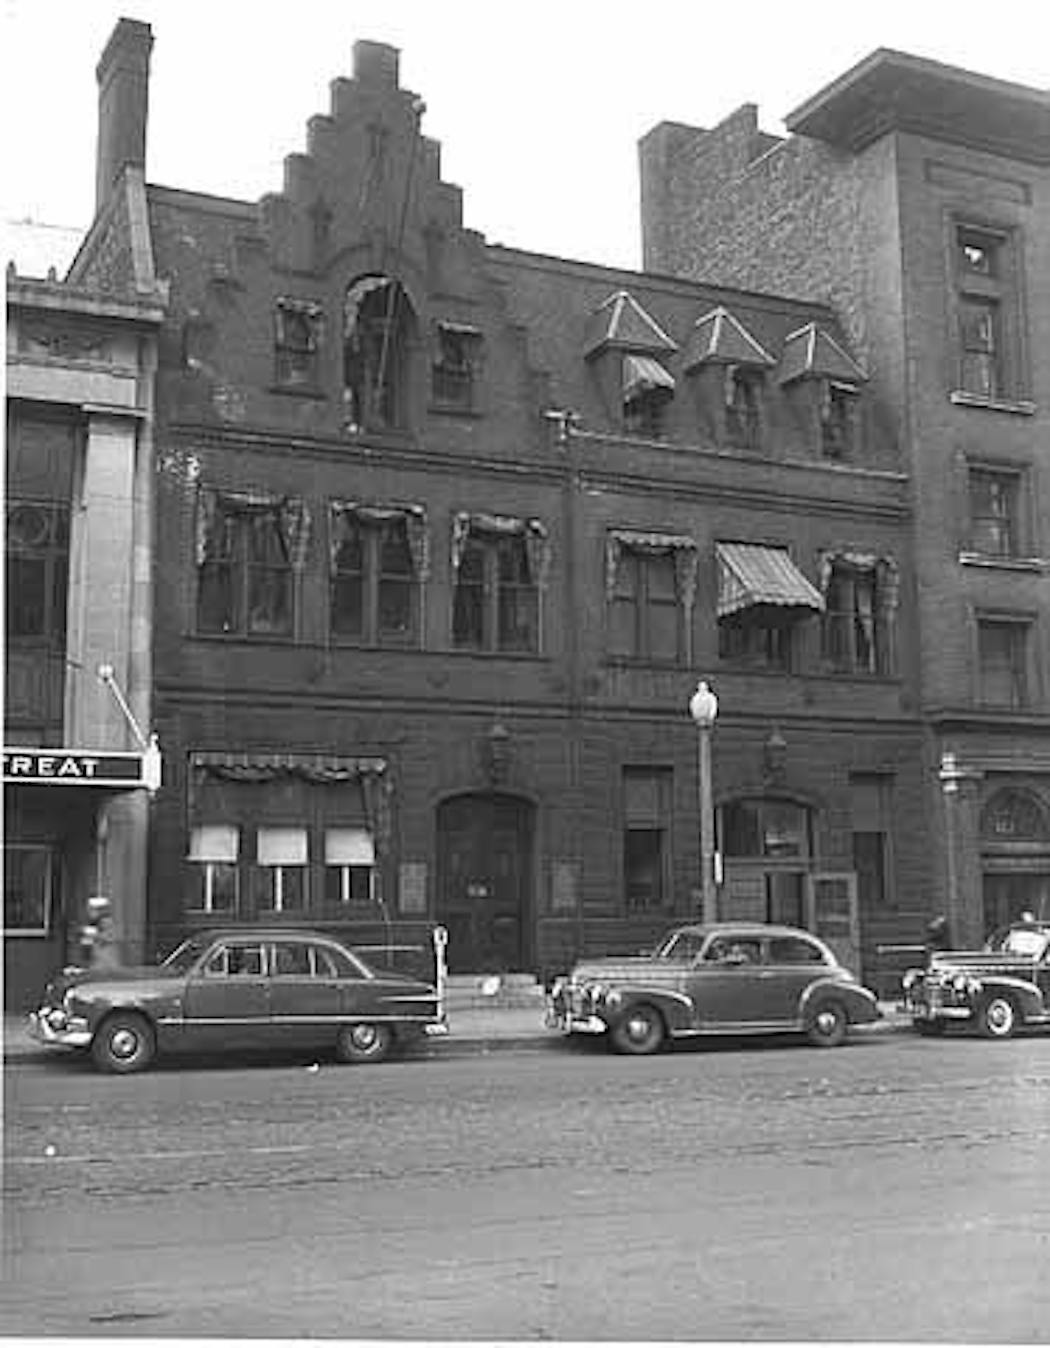 The three-story Northwestern Miller Building, shown in 1953, was a rare commercial example of the Tudor Revival style, featuring a rusticated stone base with brick above. Its most eye-popping feature was a tall step gable, the only one of its kind in downtown Minneapolis.